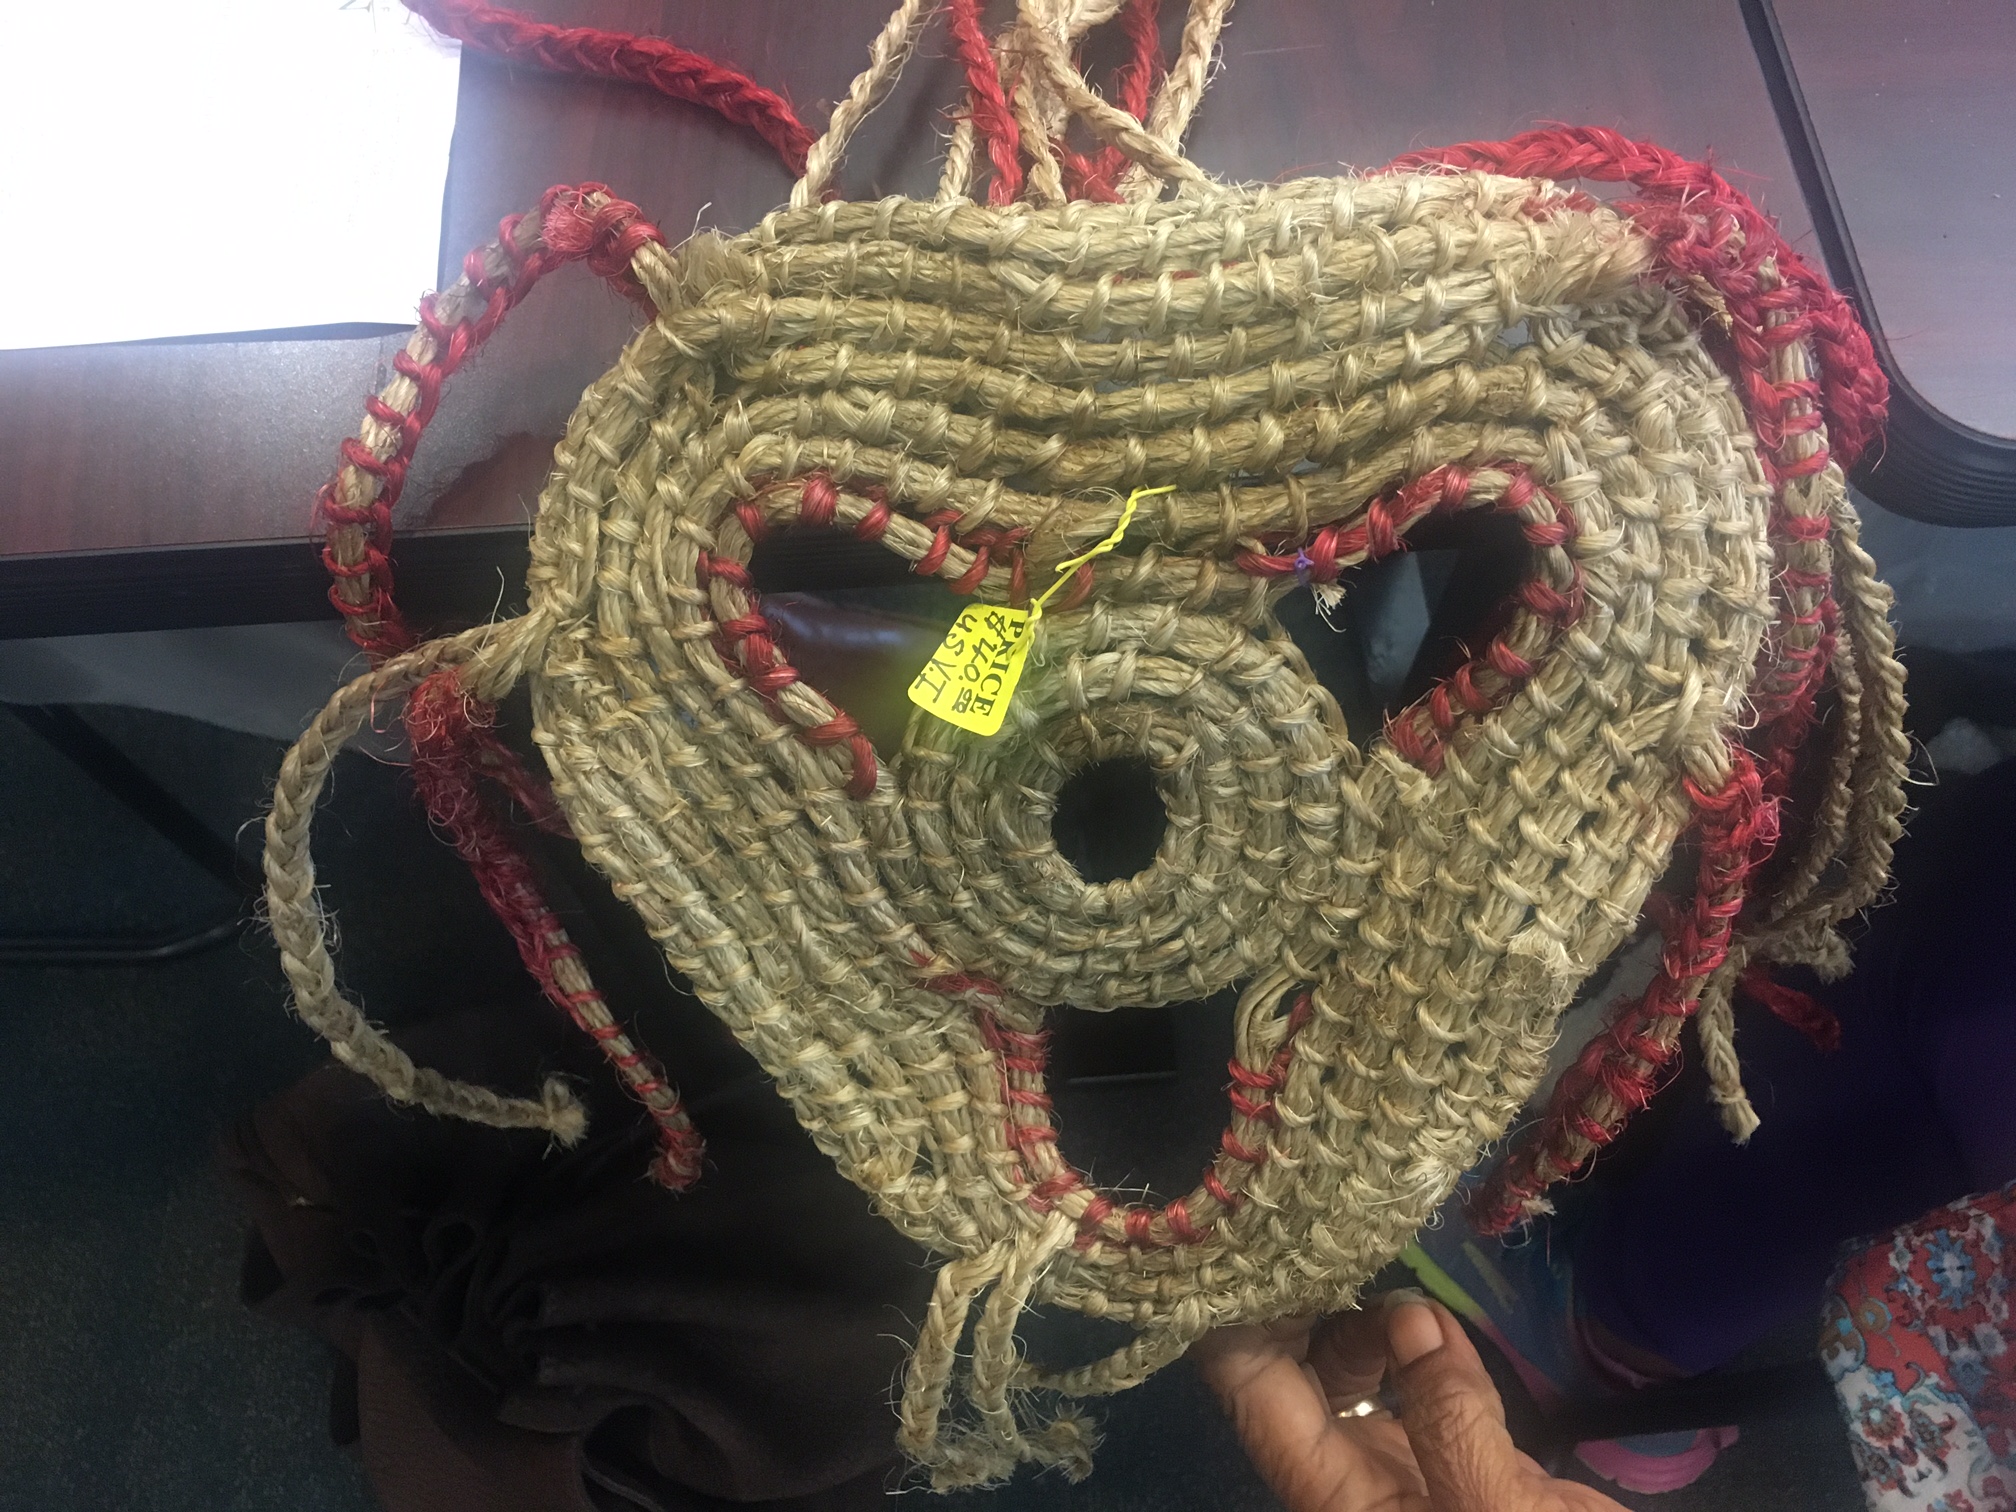 Locally made mask was displayed at Culture Bearers Conference on St. Thomas on Sept. 2.